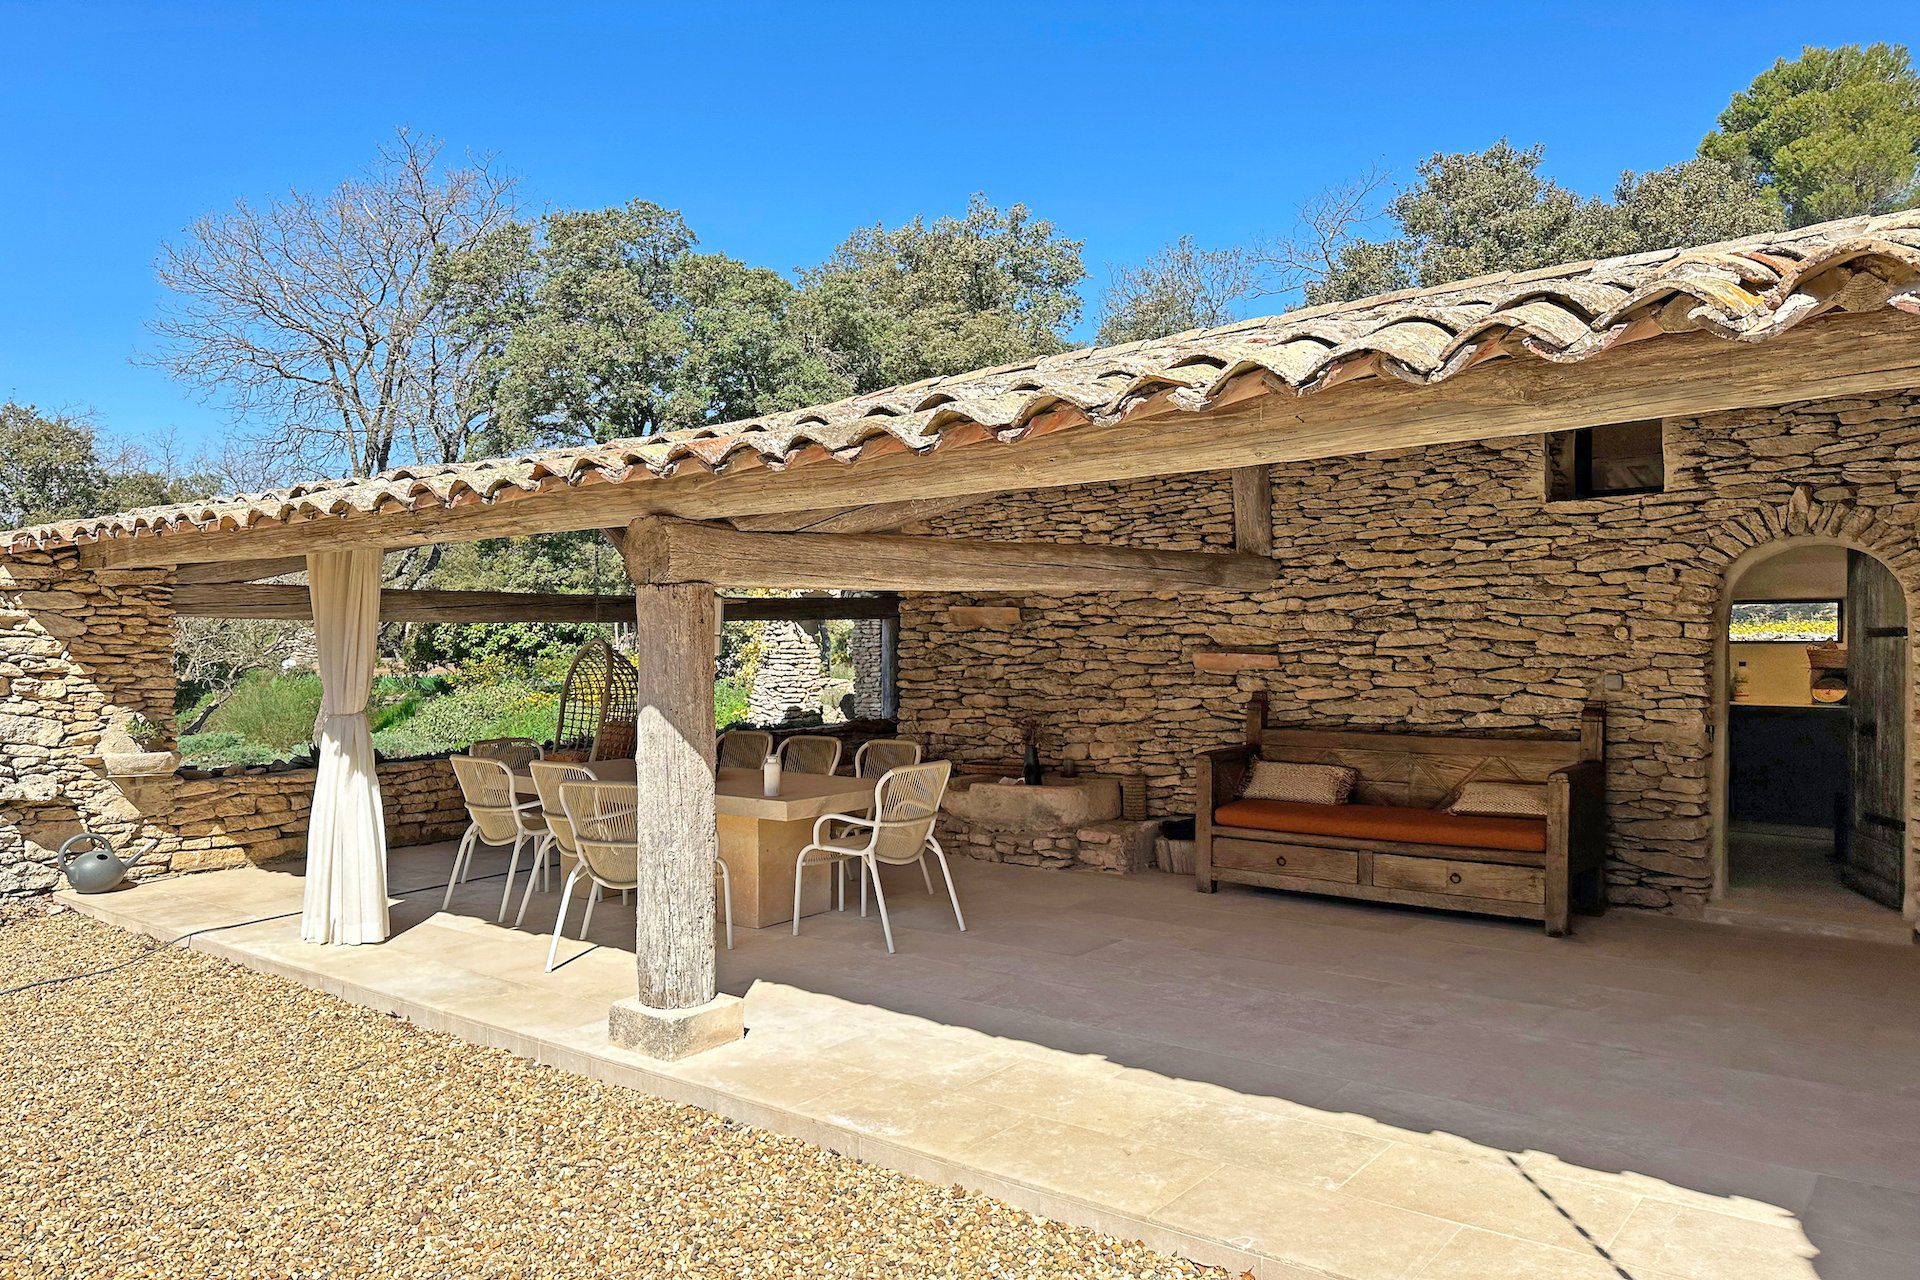 Méditerranée Location Mas with Private pool in Bonnieux, Provence